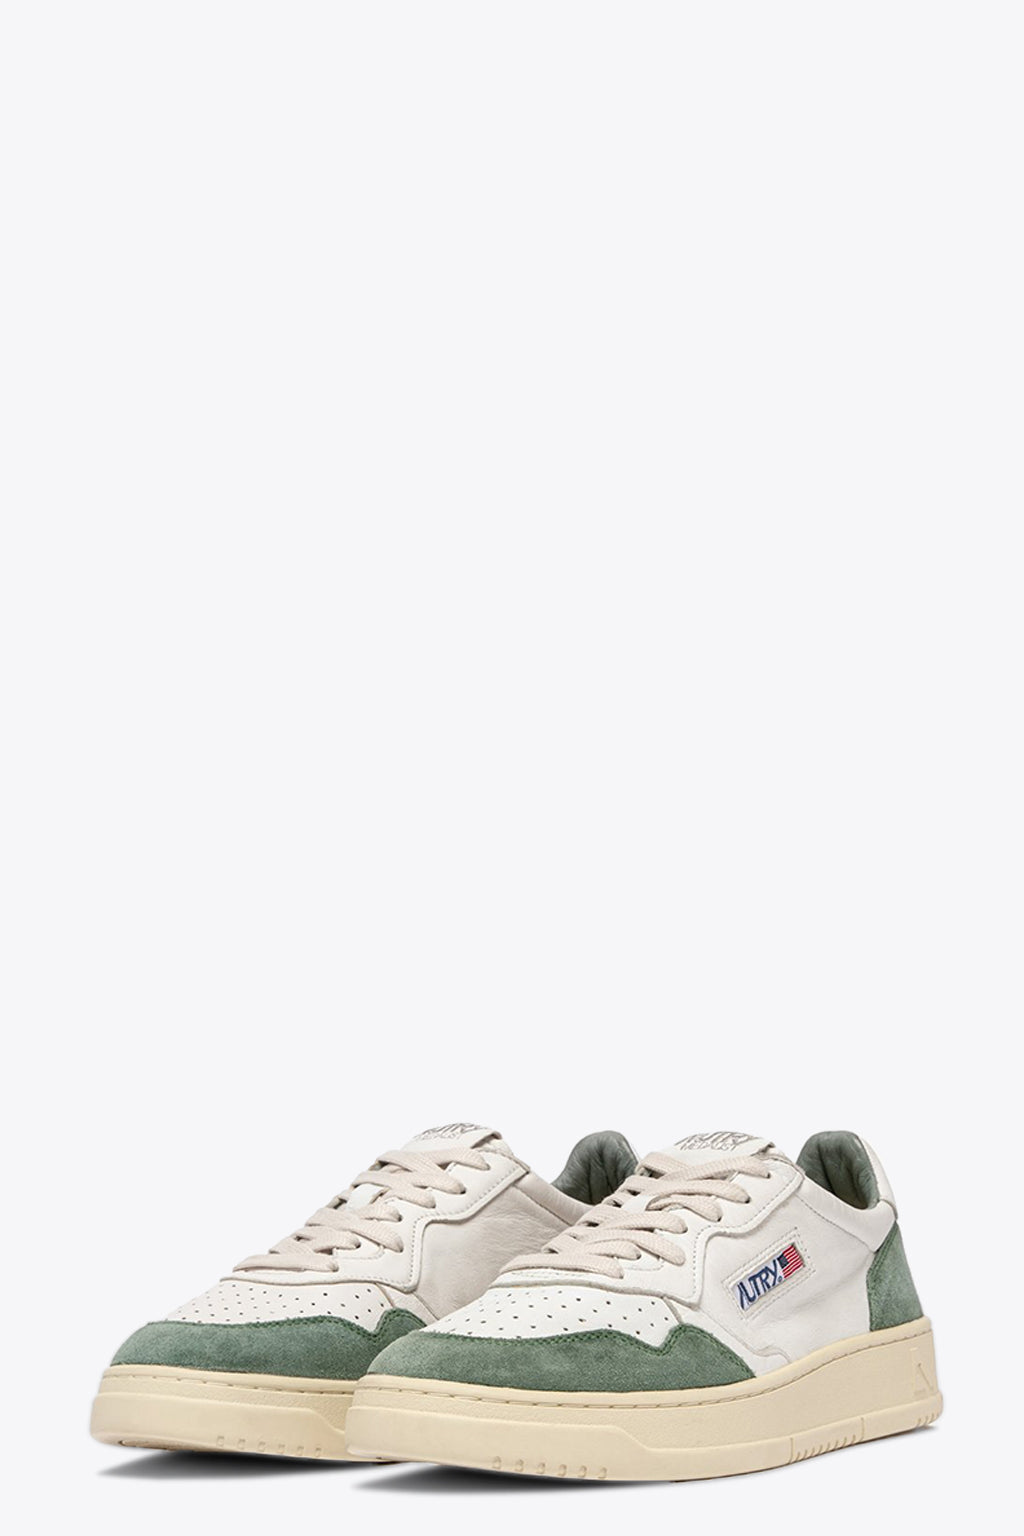 alt-image__White-leather-low-sneaker-with-green-suede-detail---Medalist